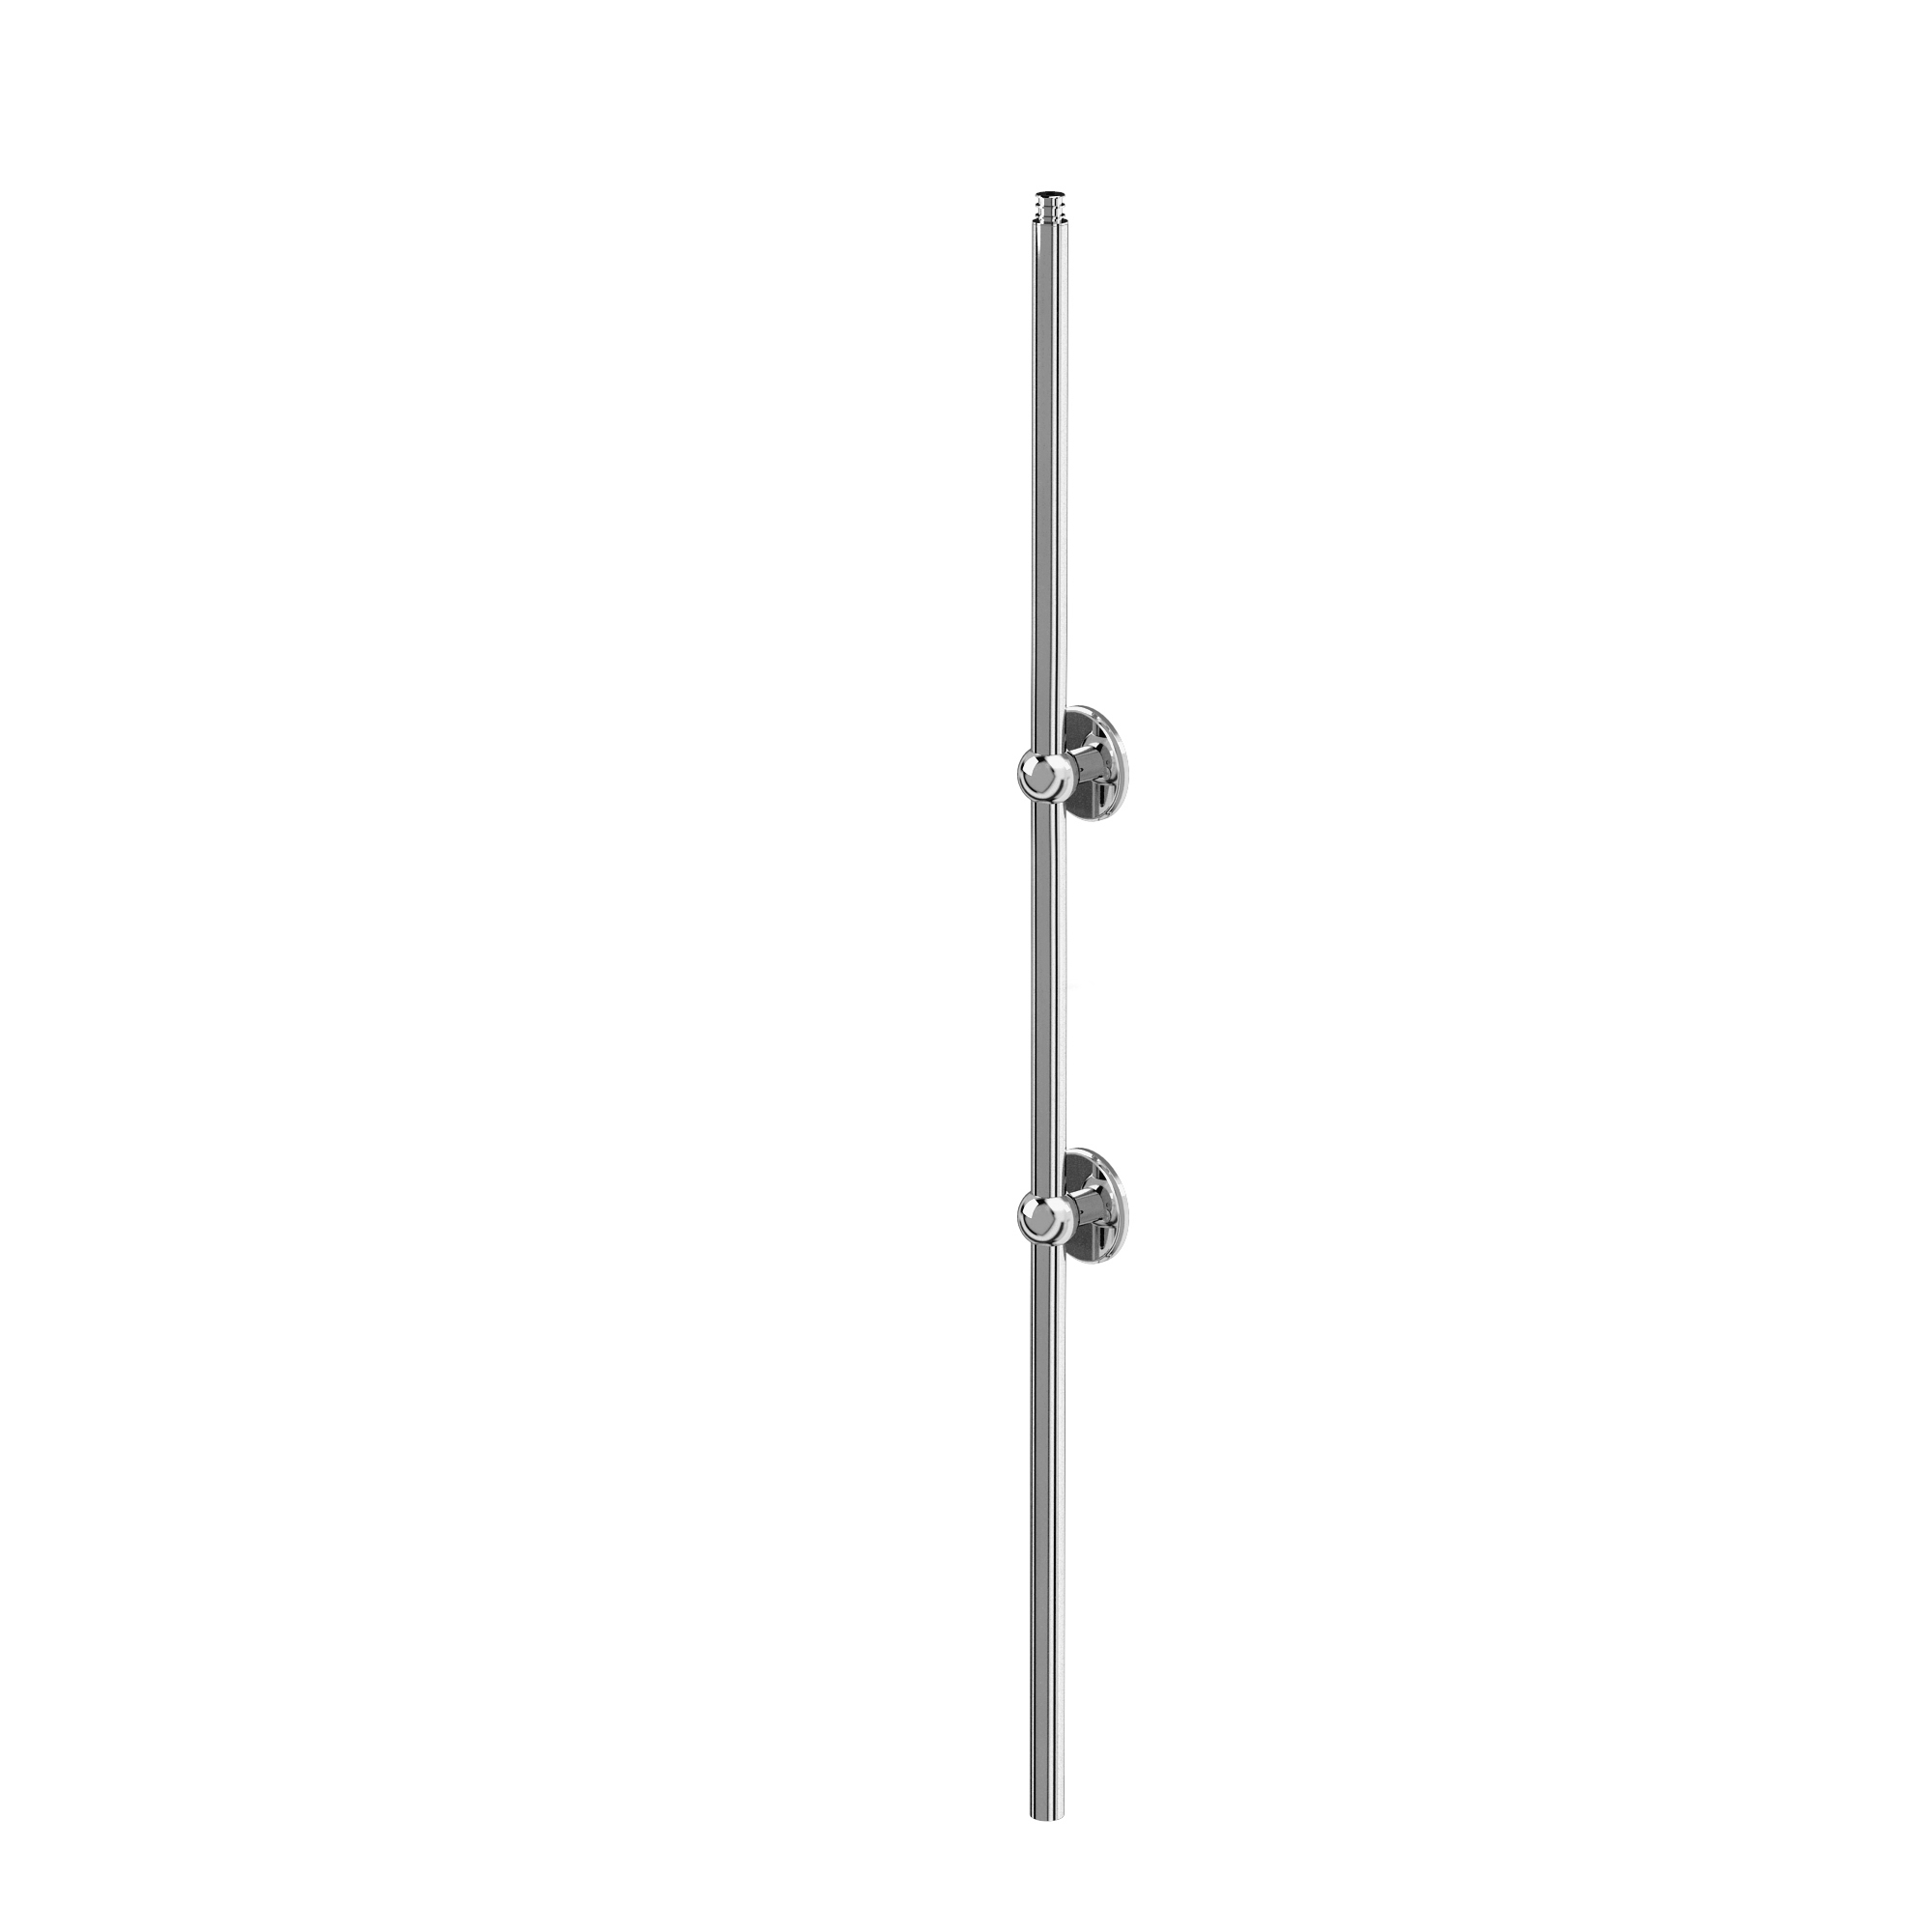 Arcade Extended vertical riser  (with two adjustable vertical riser wall brackets) - chrome